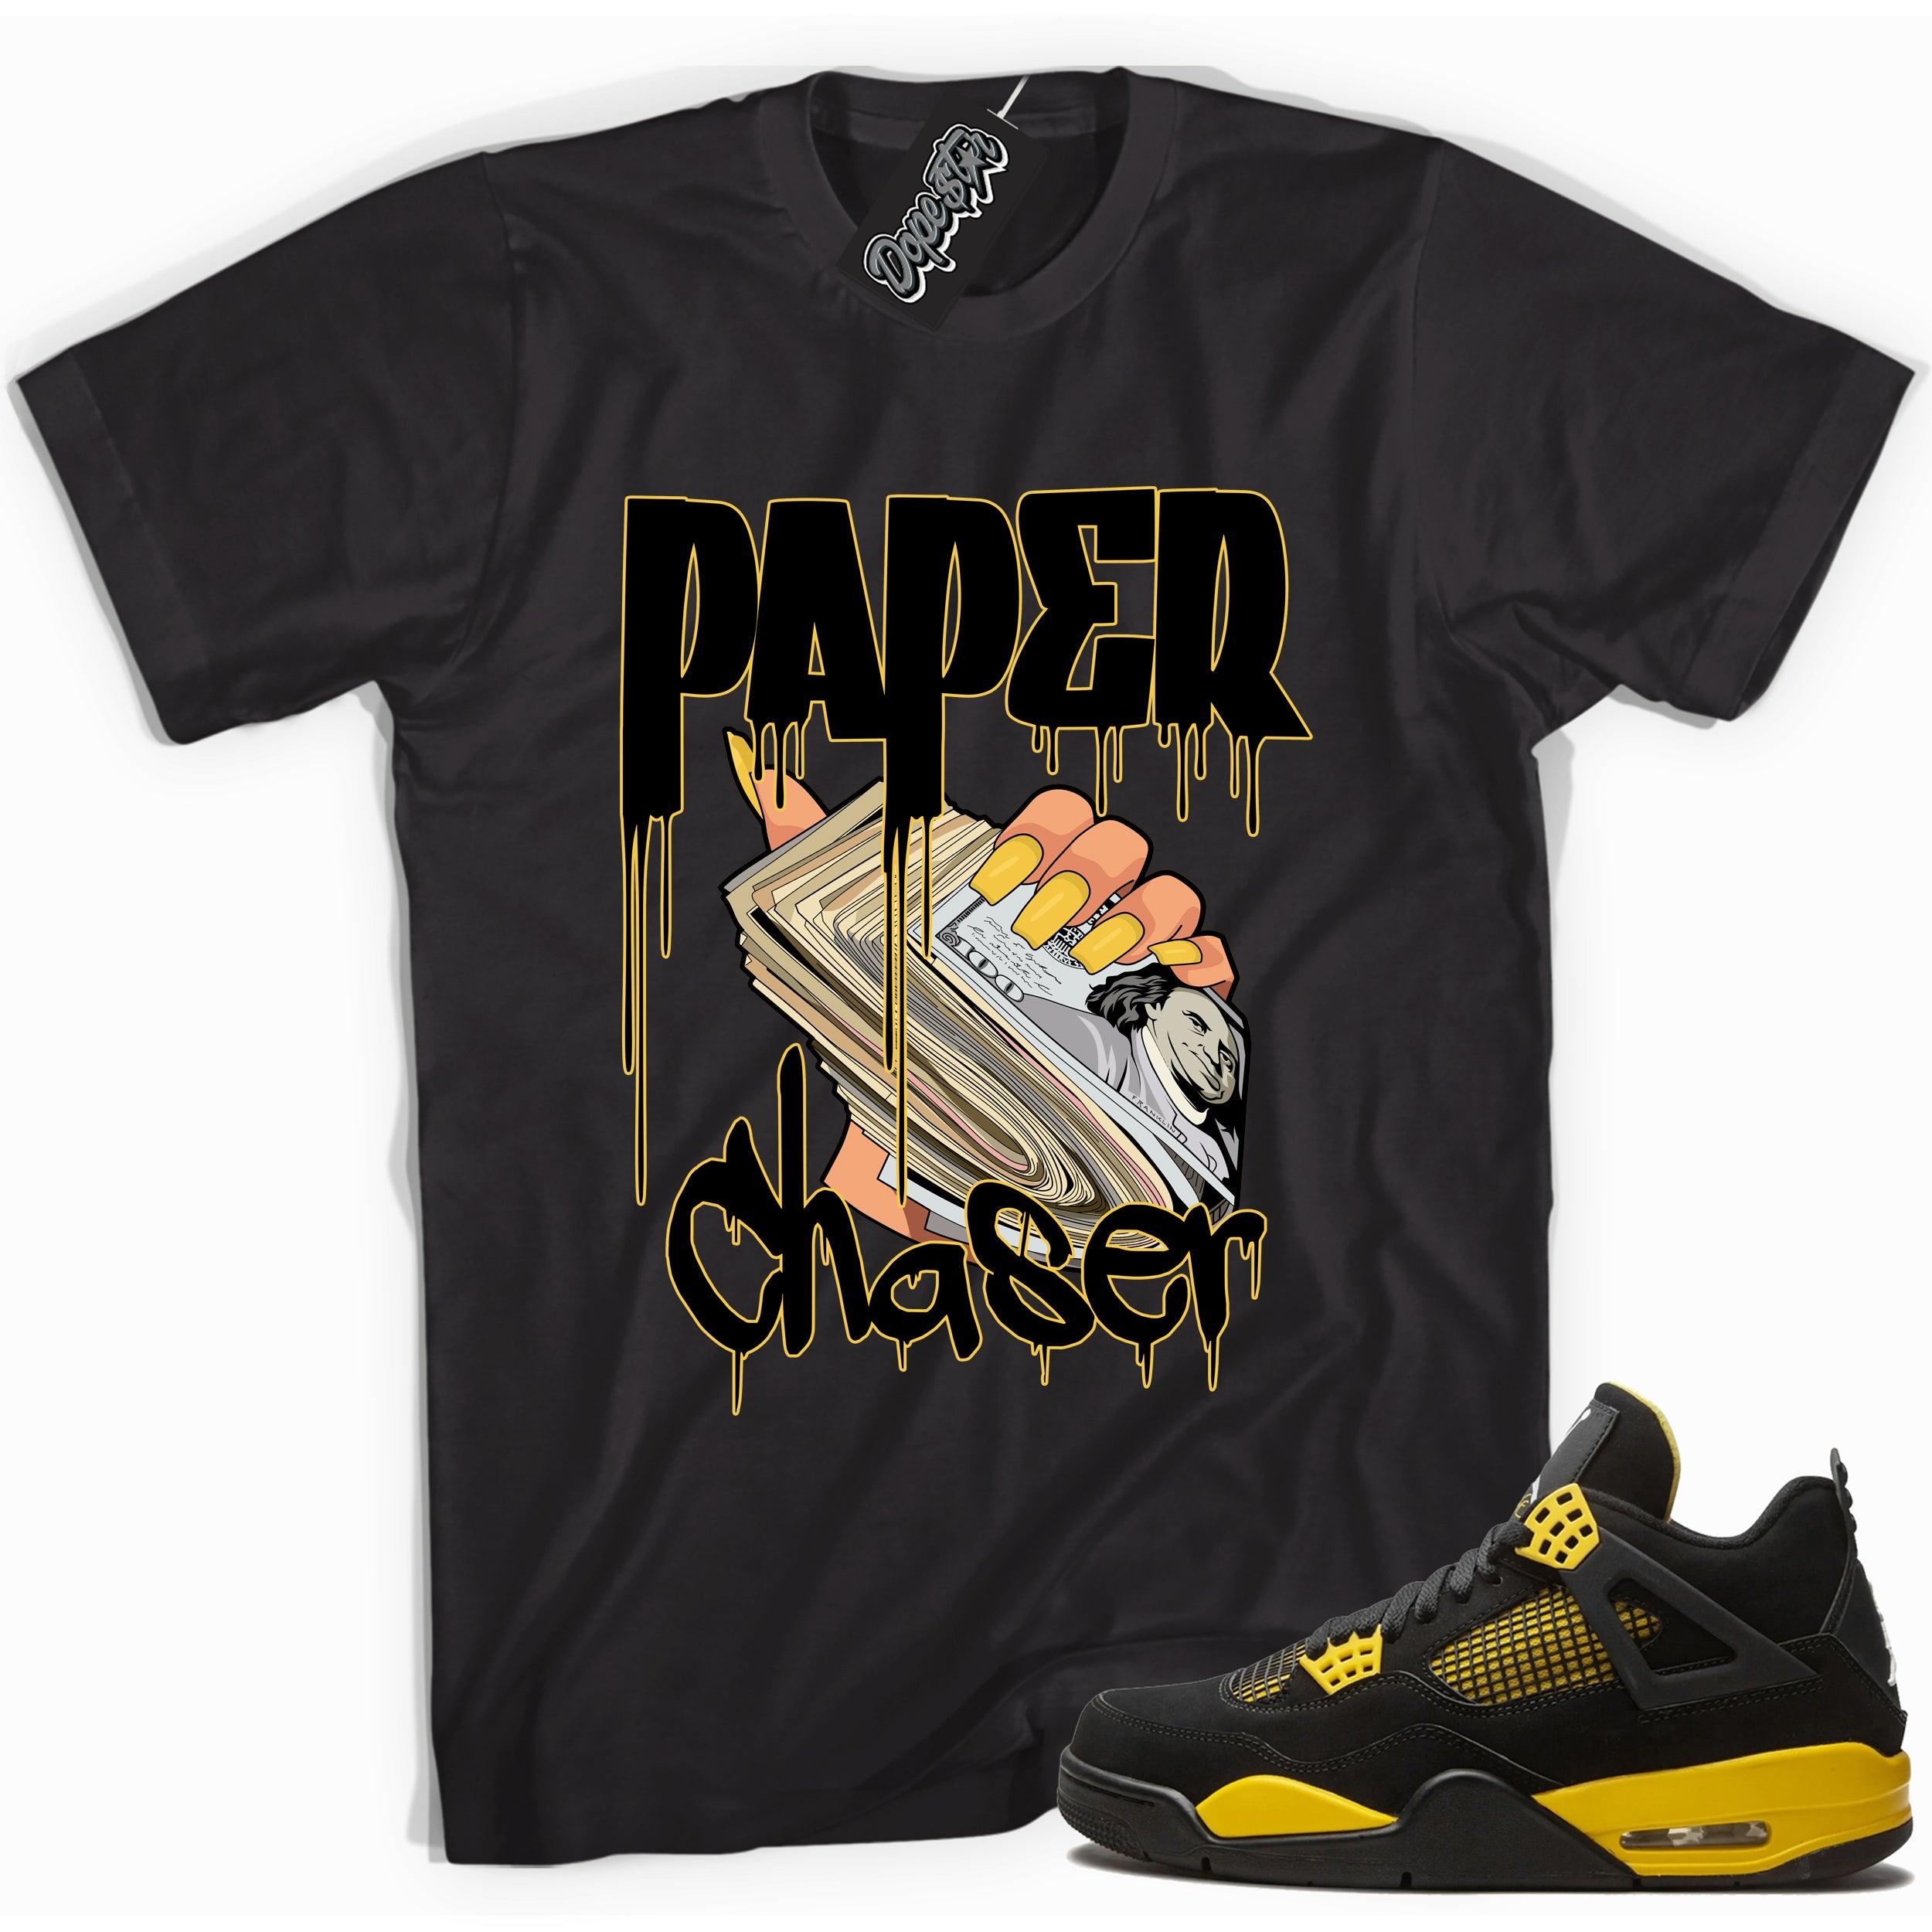 Cool black graphic tee with 'paper chaser' print, that perfectly matches  Air Jordan 4 Thunder sneakers